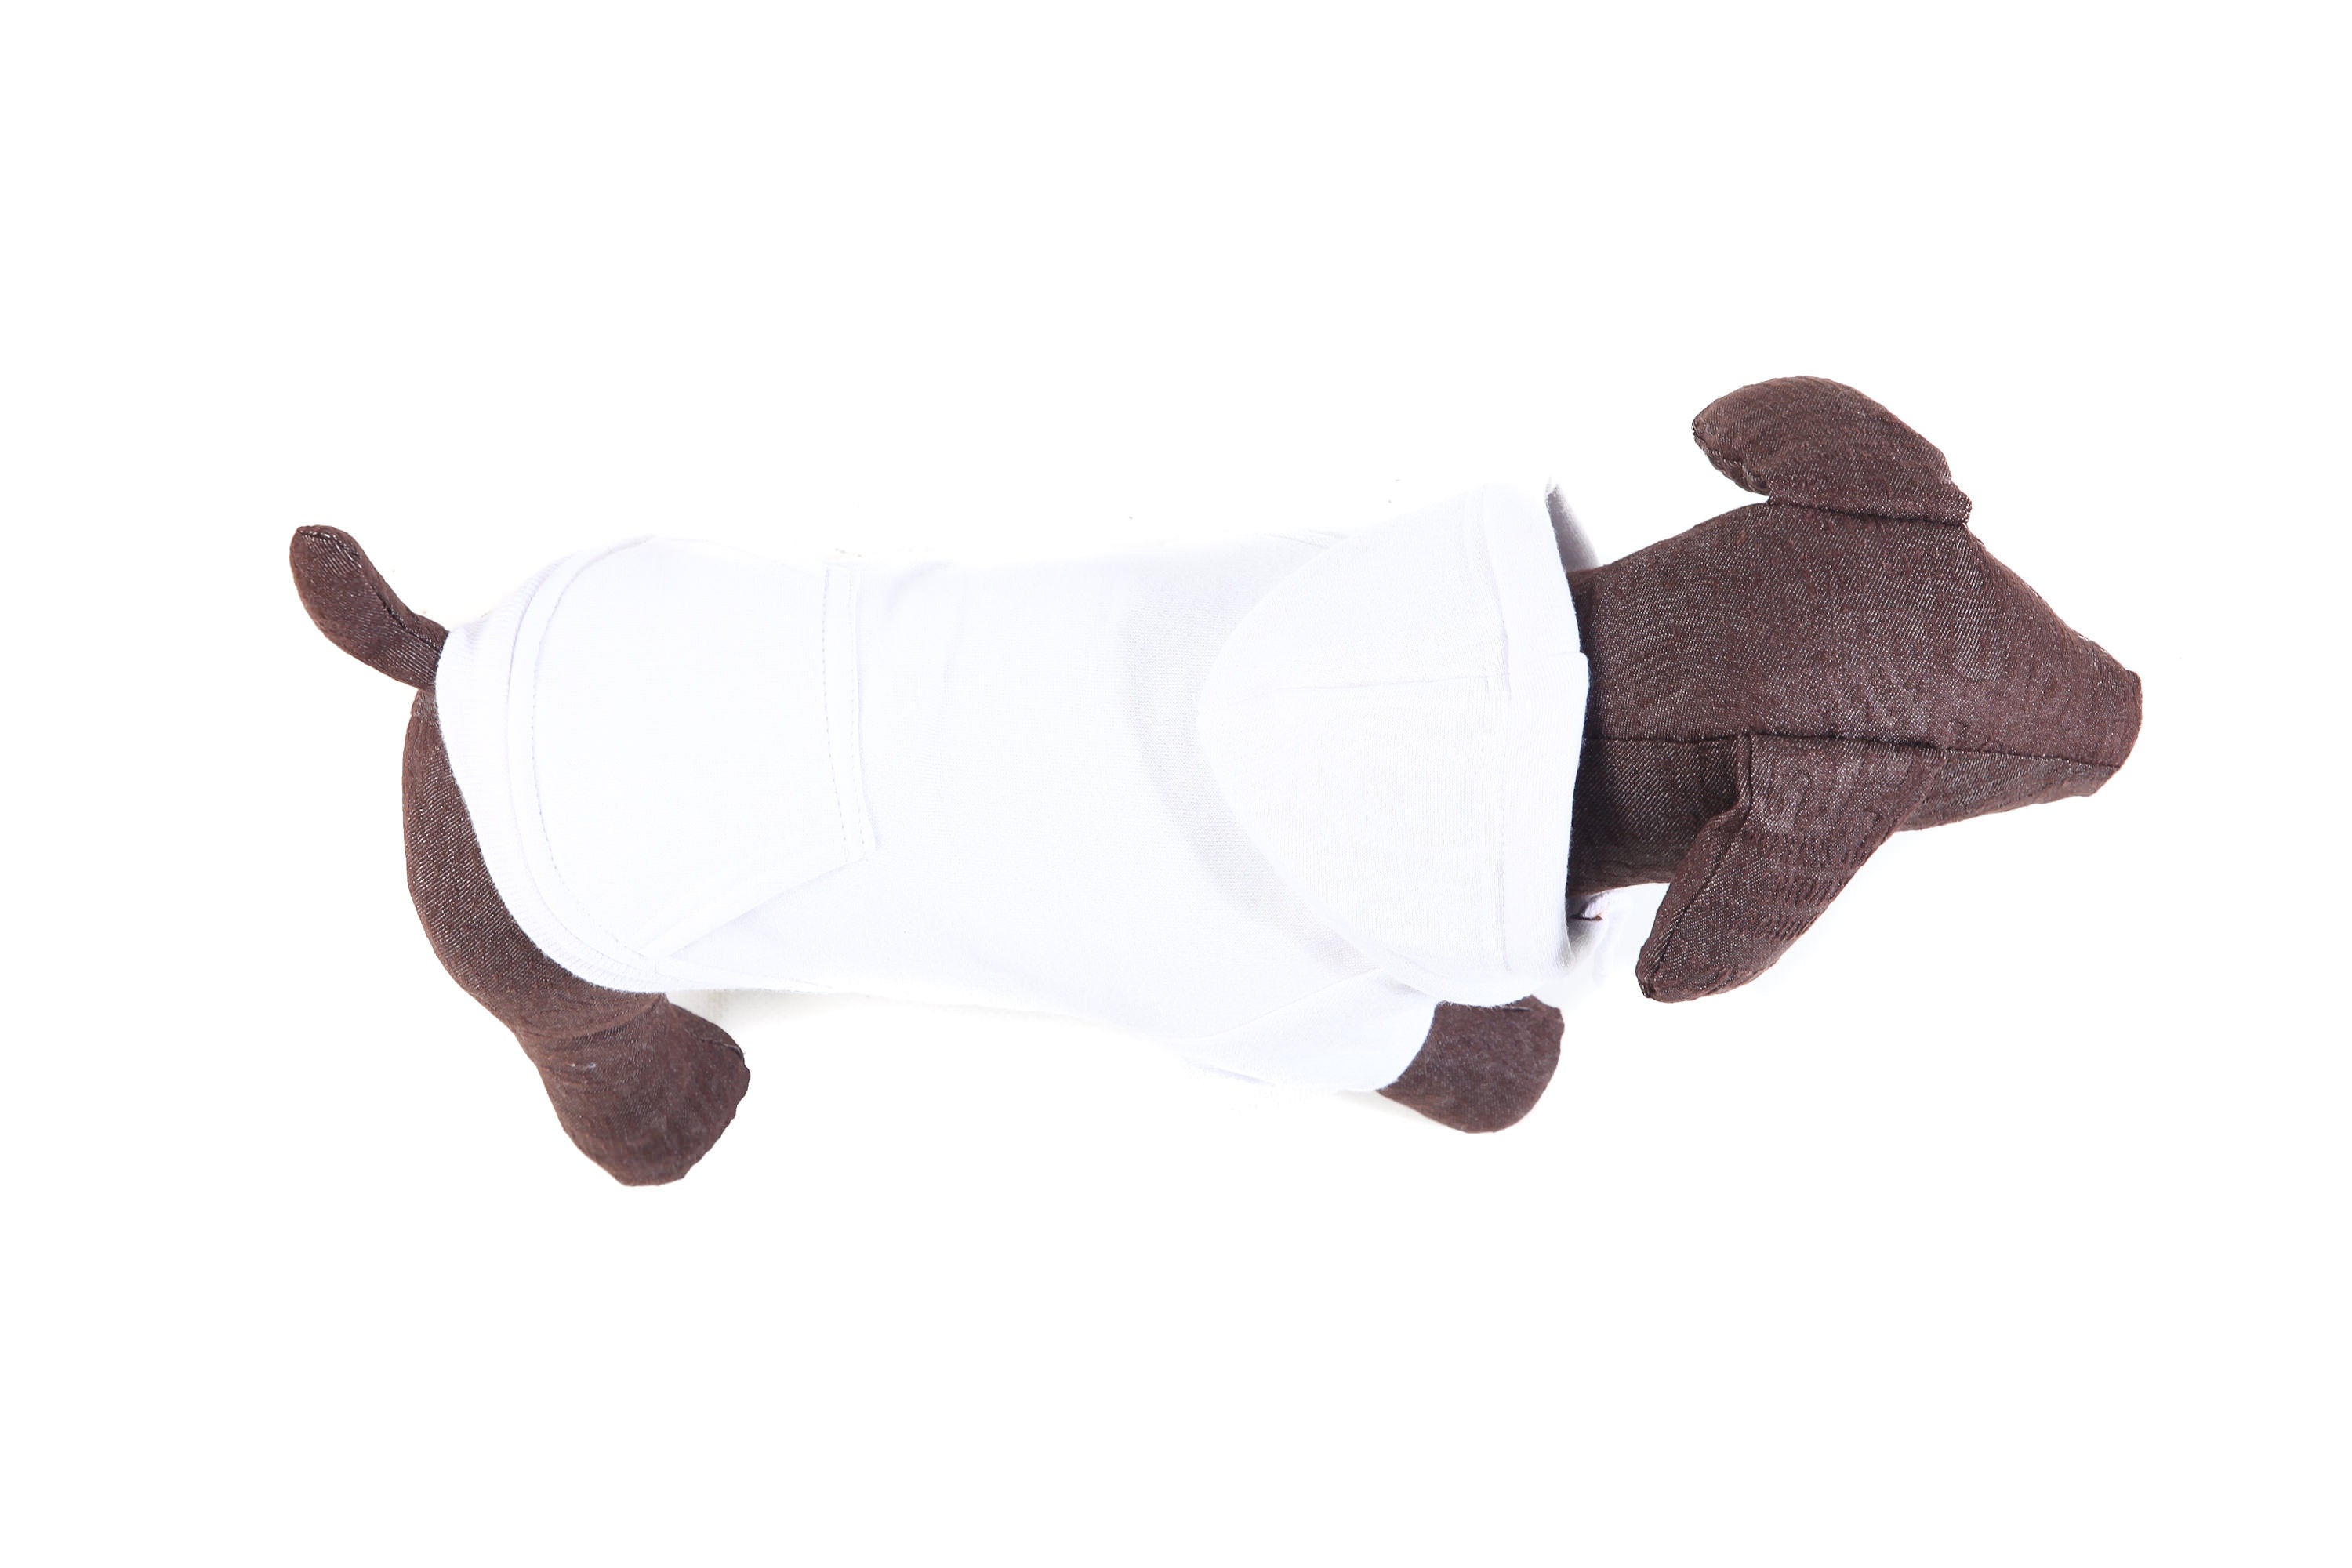 Dog Hoodie in White